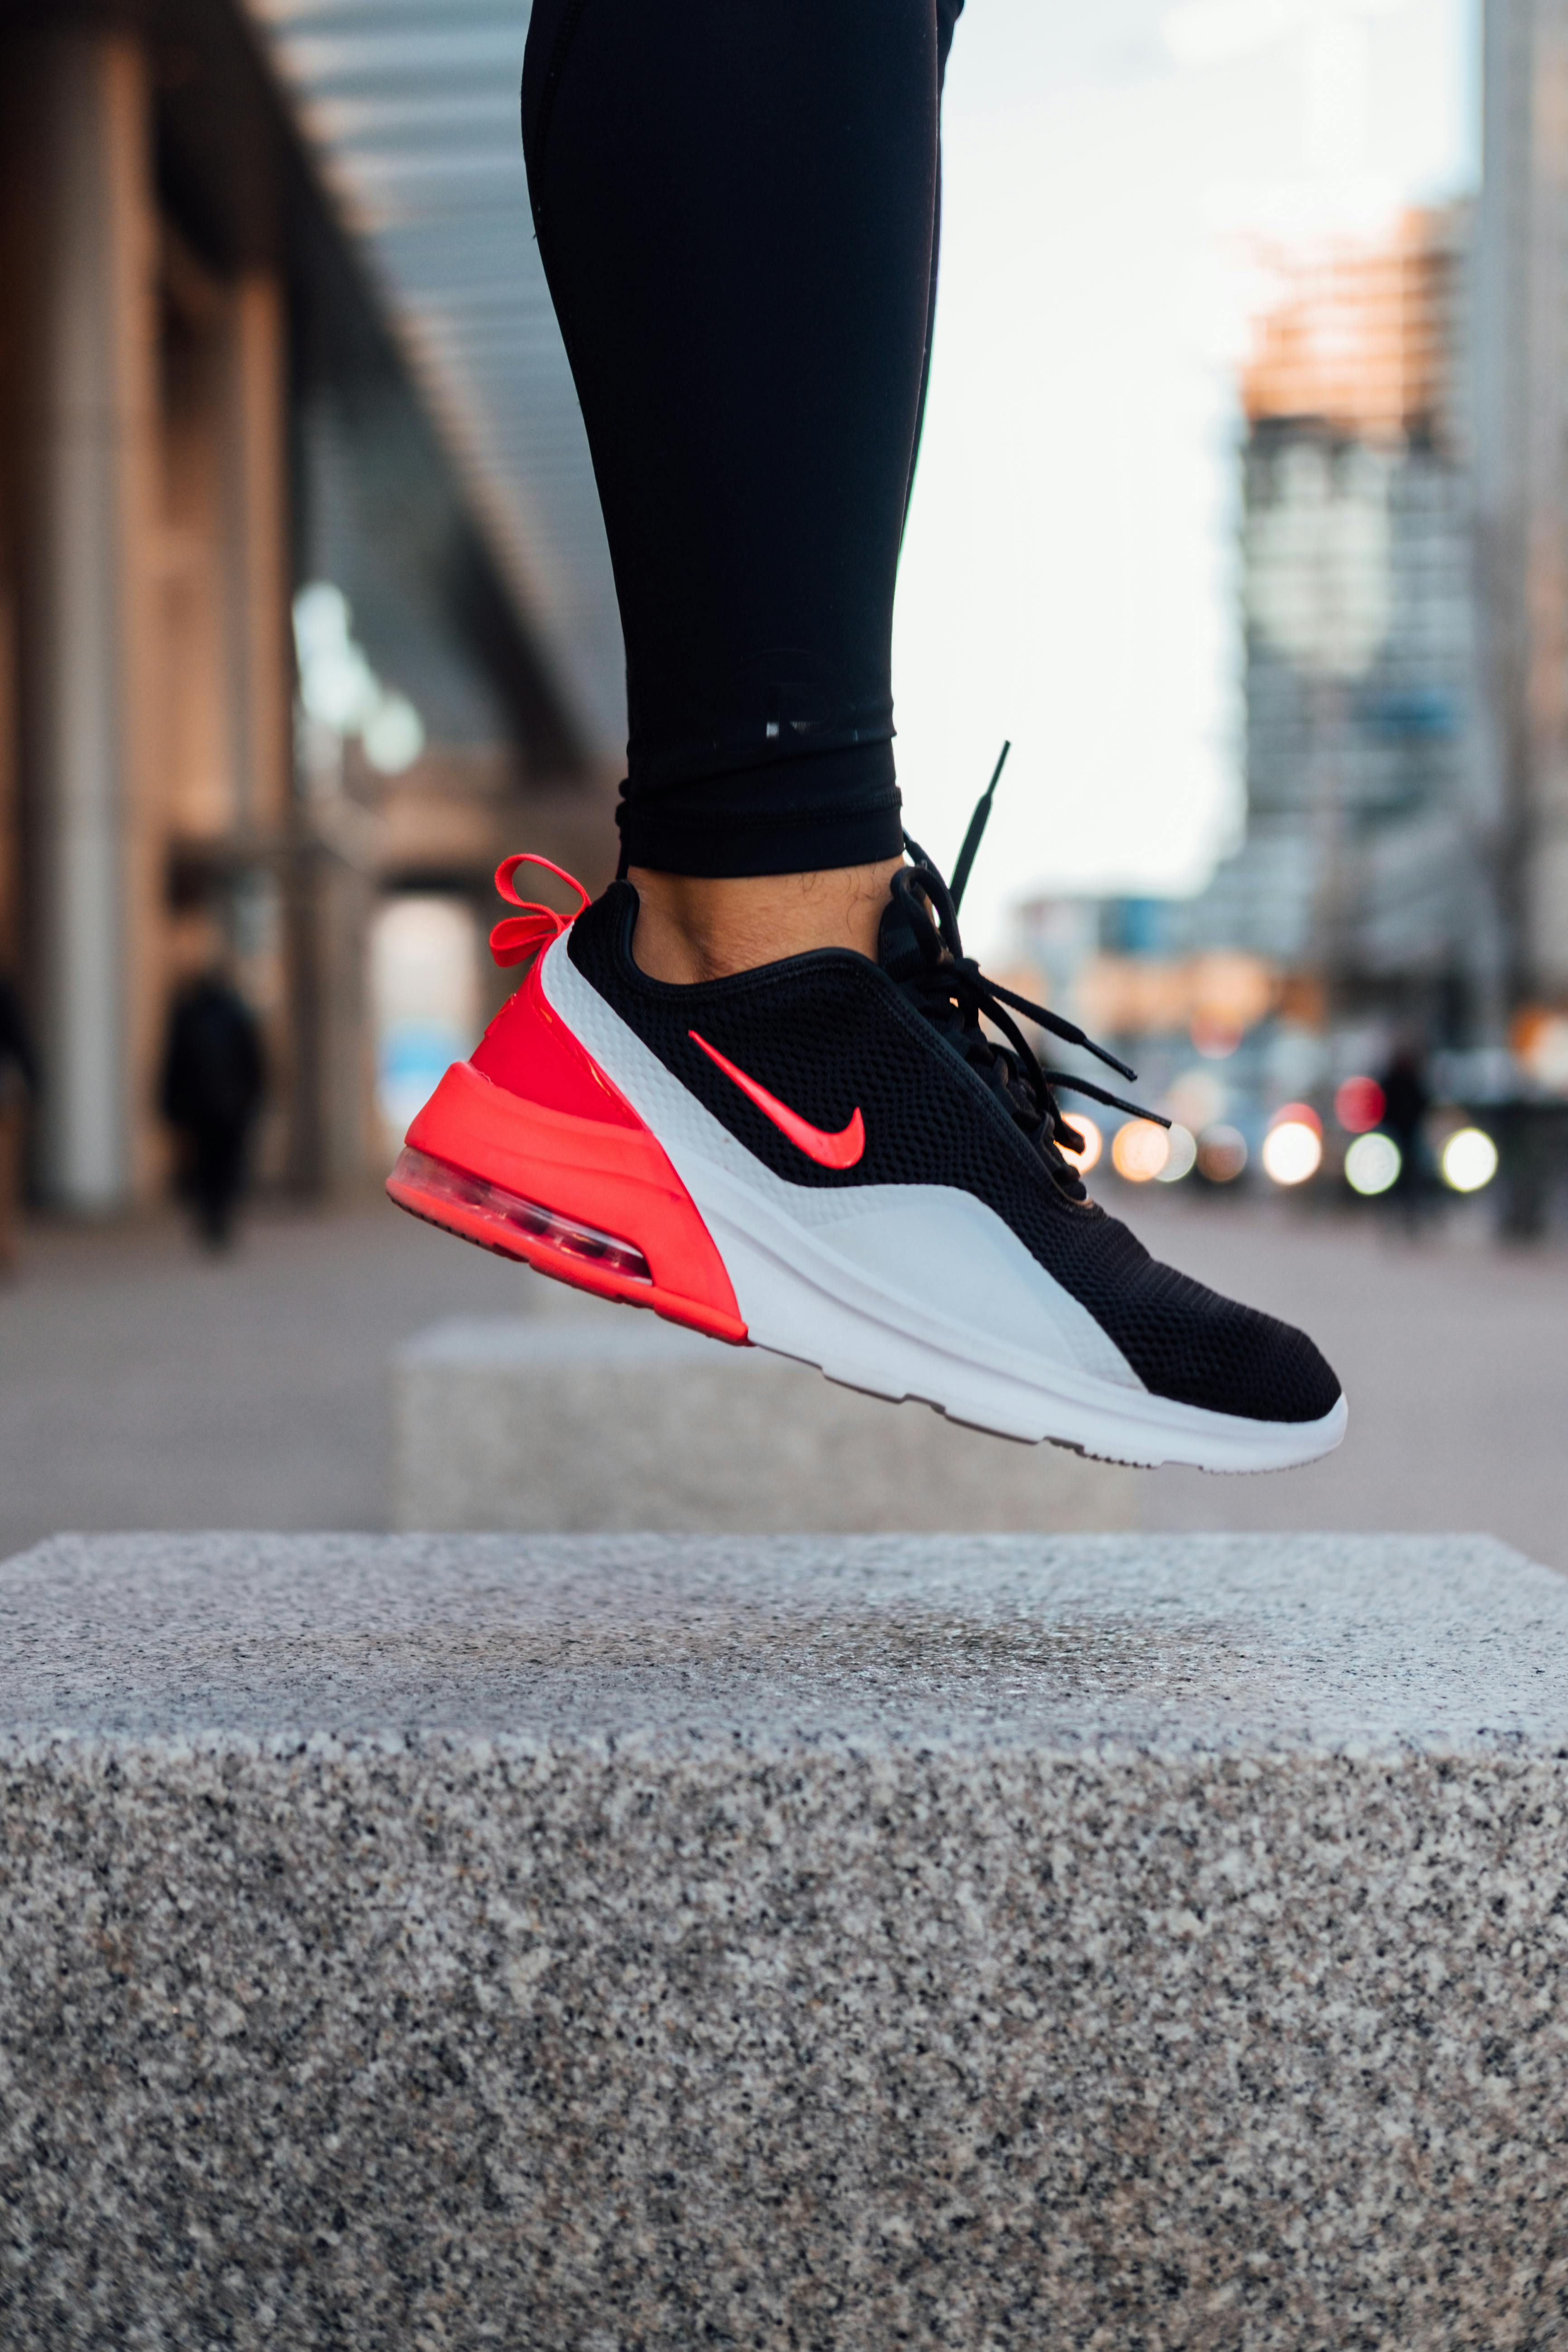 Nike Shoes Photos, Download The BEST Free Nike Stock Photos & HD Images